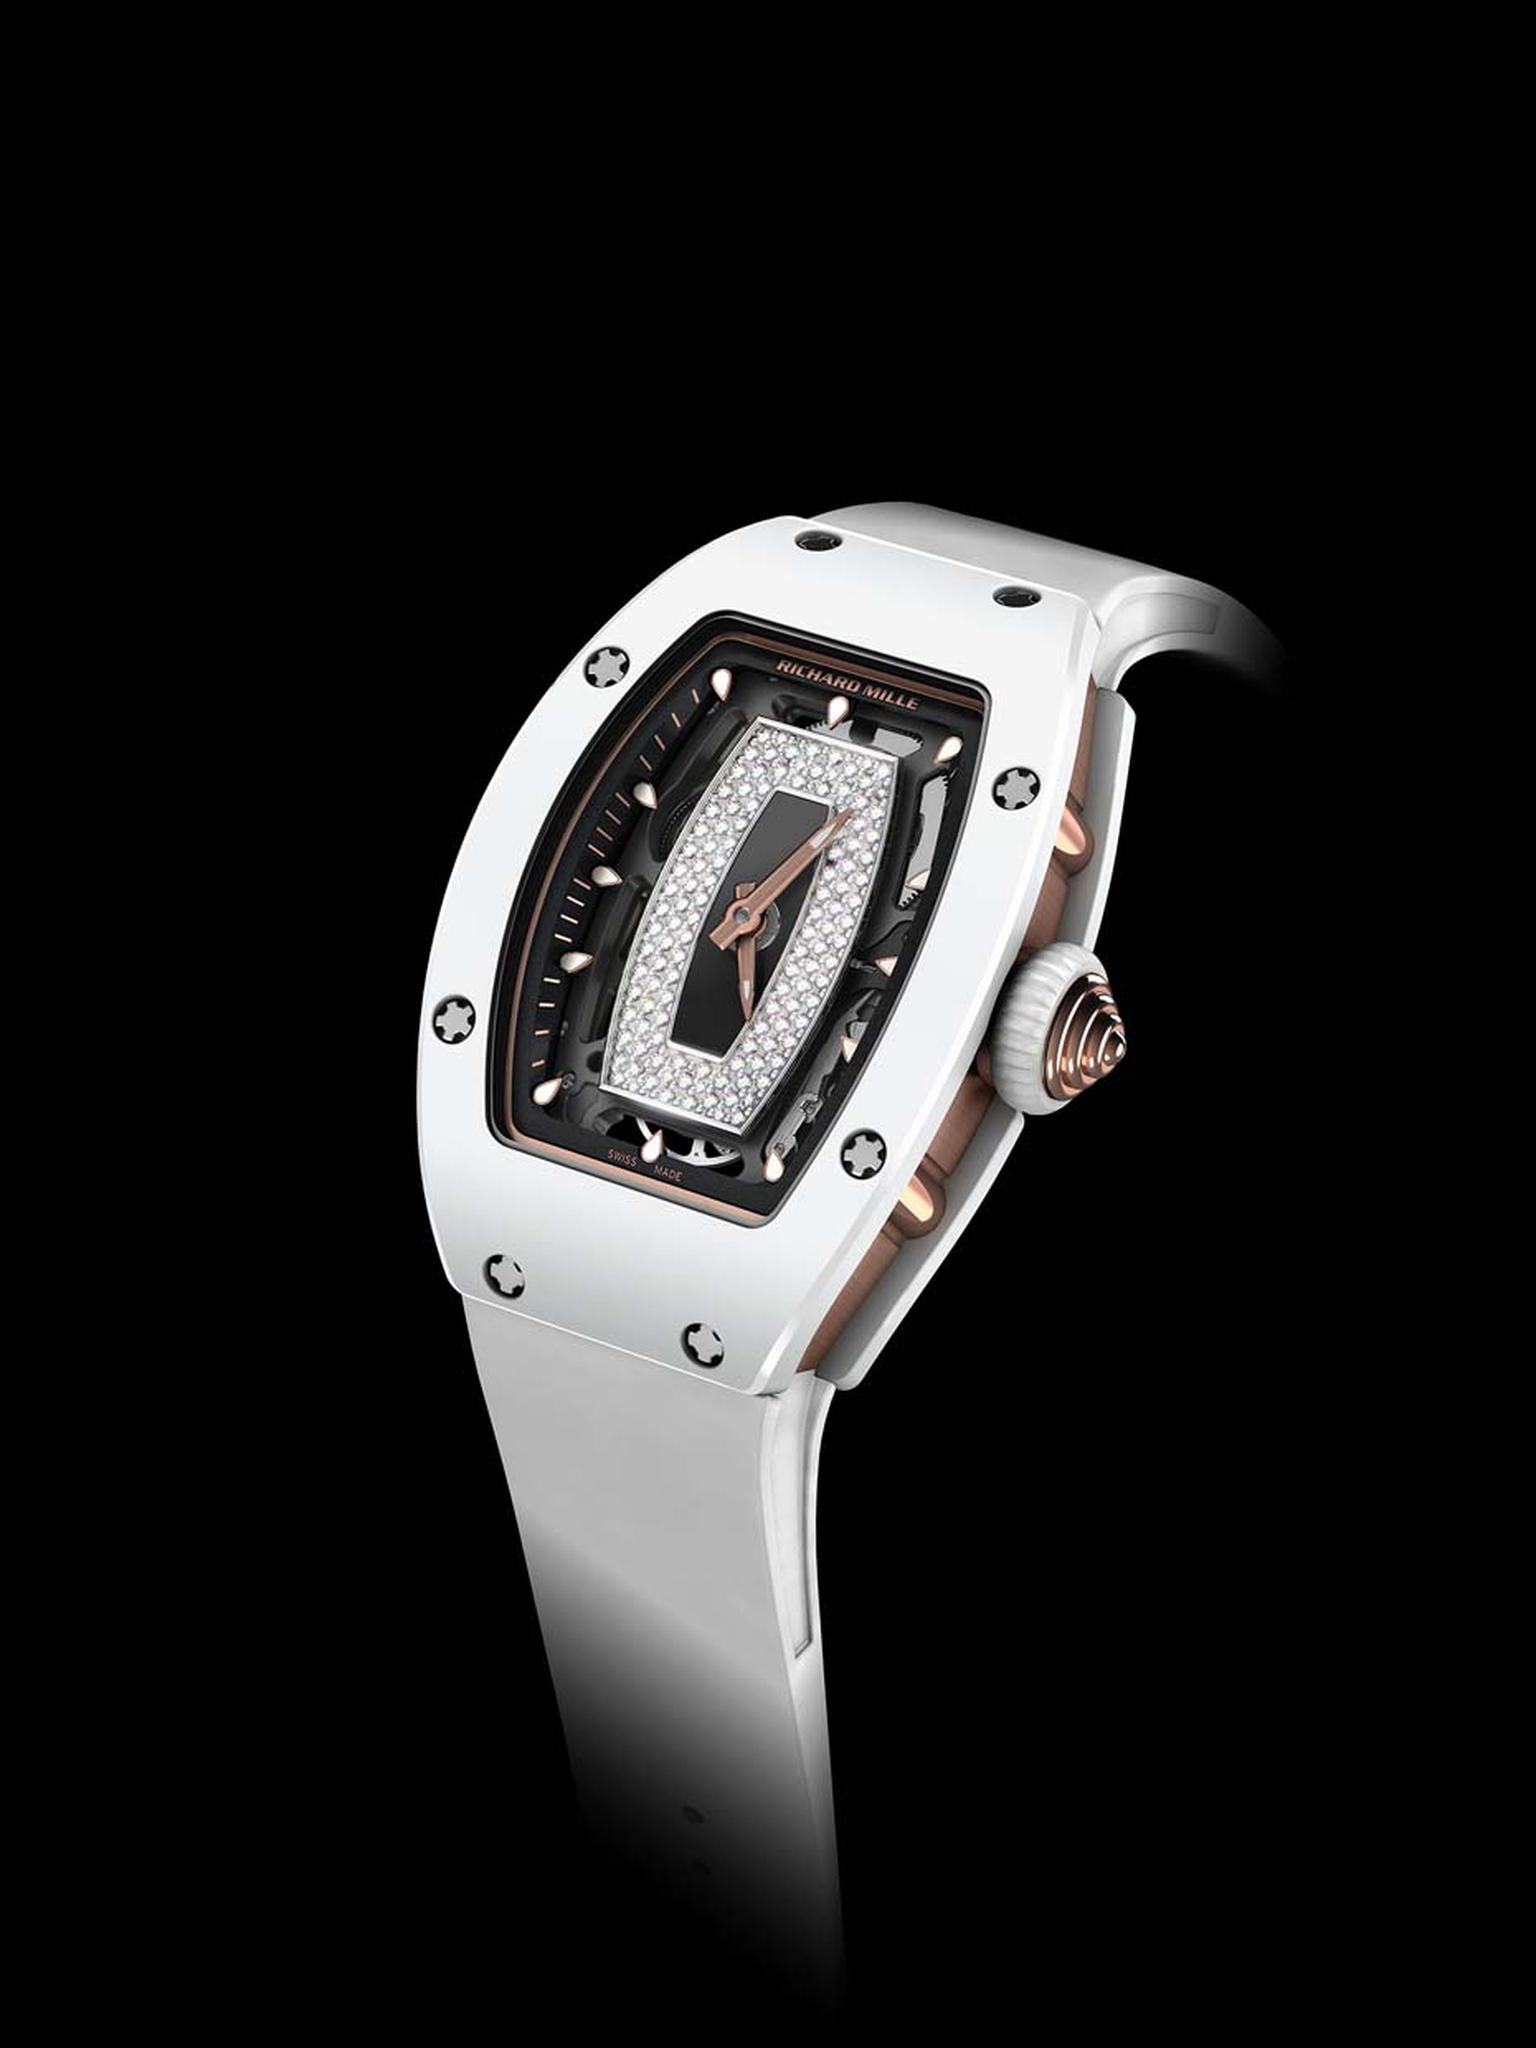 Crafted from white ceramic and red gold, the Richard Mille 07-01 watch features a tonneau-shaped case housing a skeletonised dial that showcases the movement. The decorative pavé diamond inner dial mirrors the shape of the bezel and has central luminescen